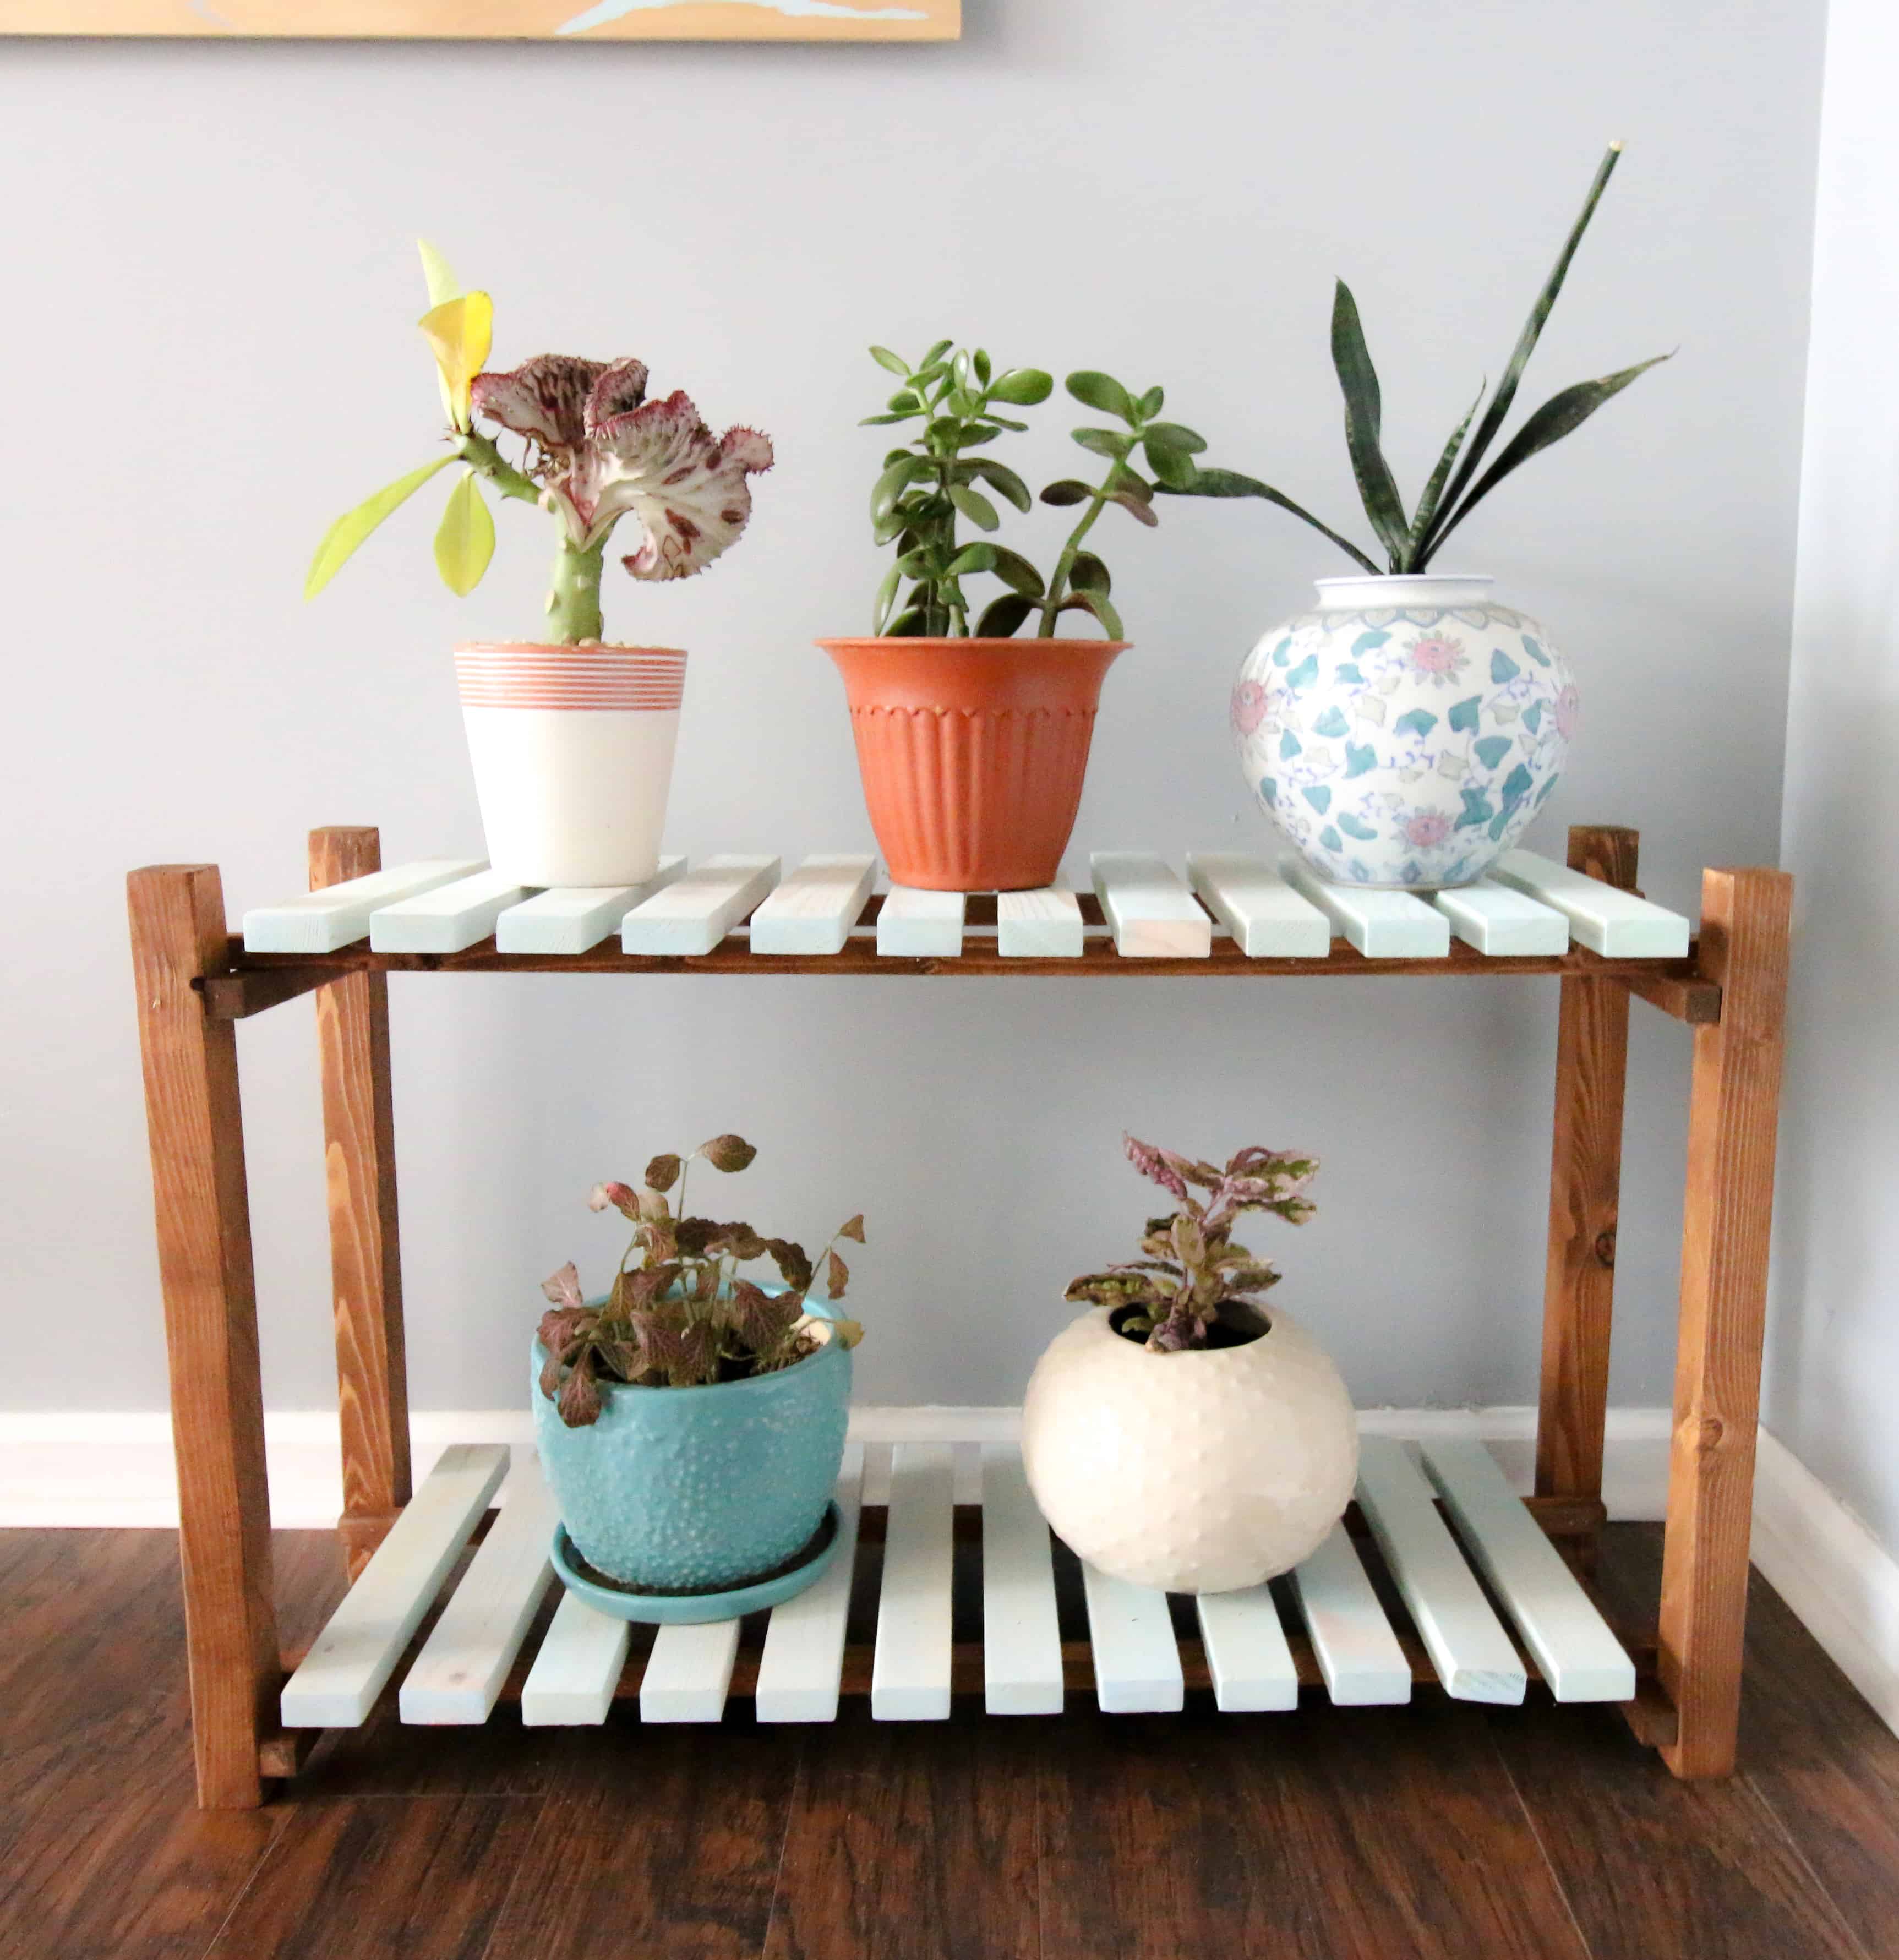 plant stand diy stands plants make wooden charlestoncrafted indoor easy slatted so small potted corner weekend